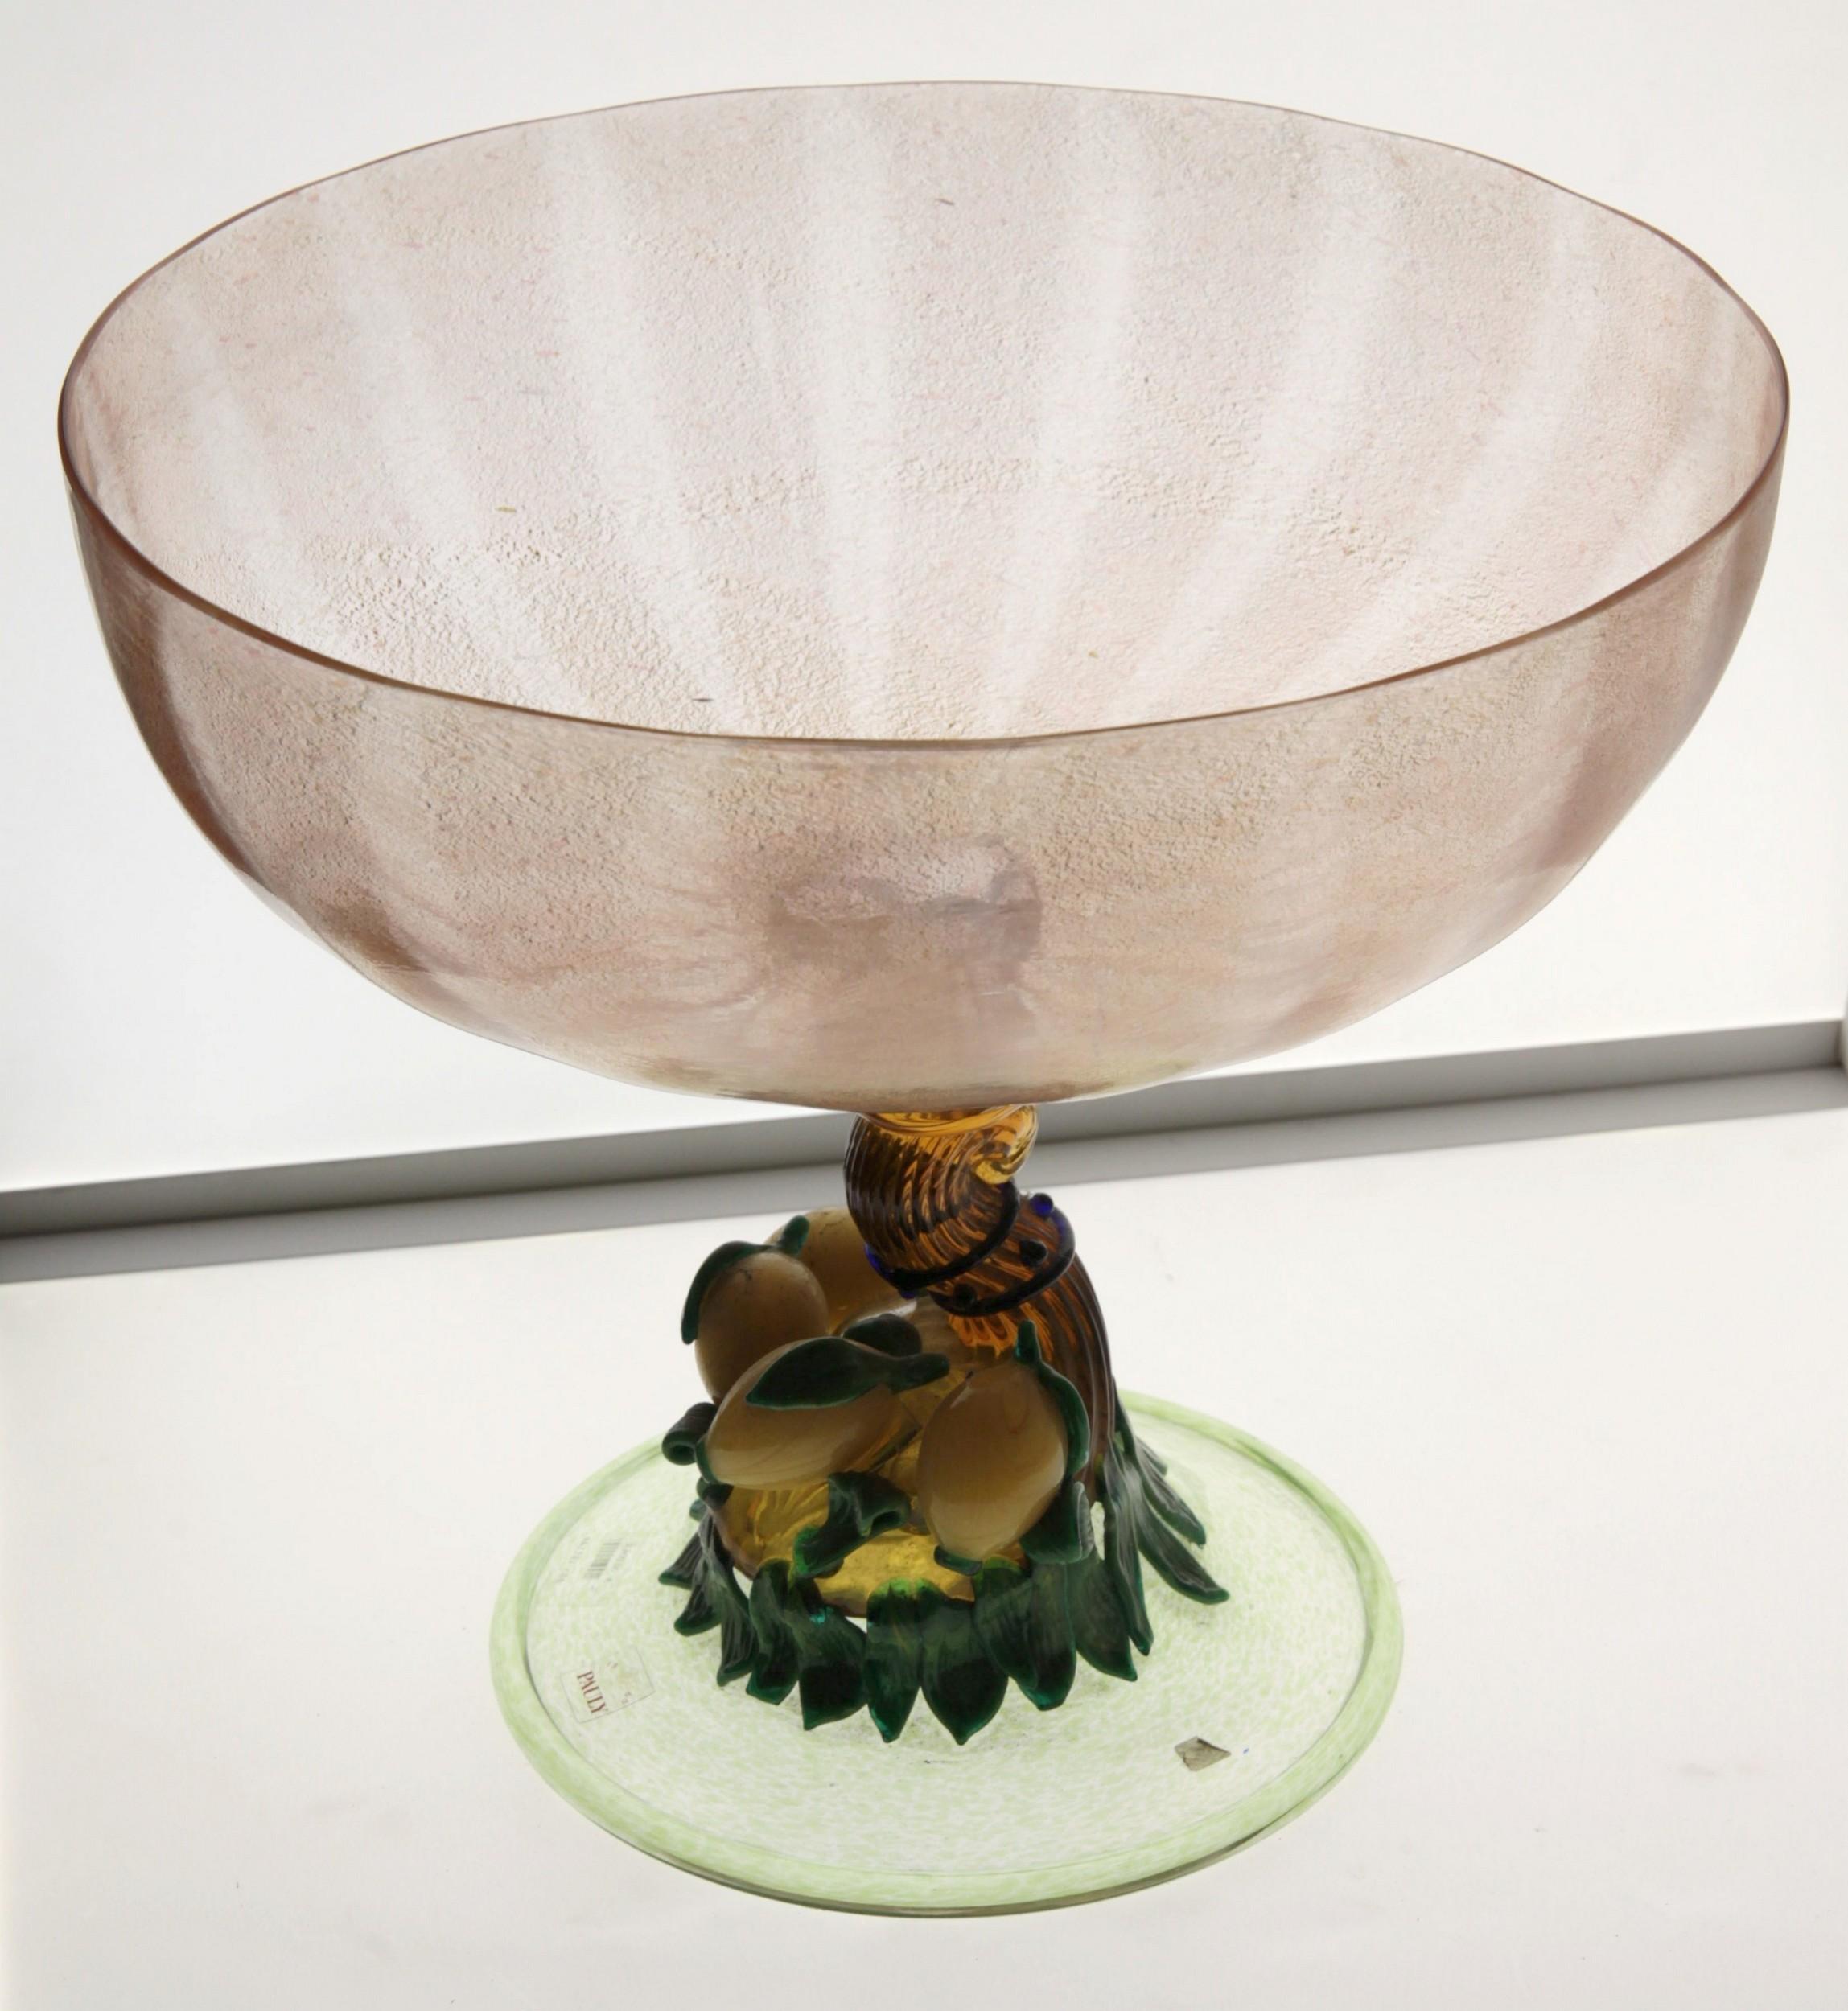 20th Century Pauly Venice Cornucopia Footed Bowl, Murano Glass, Gold Leaf Applications, 1960s